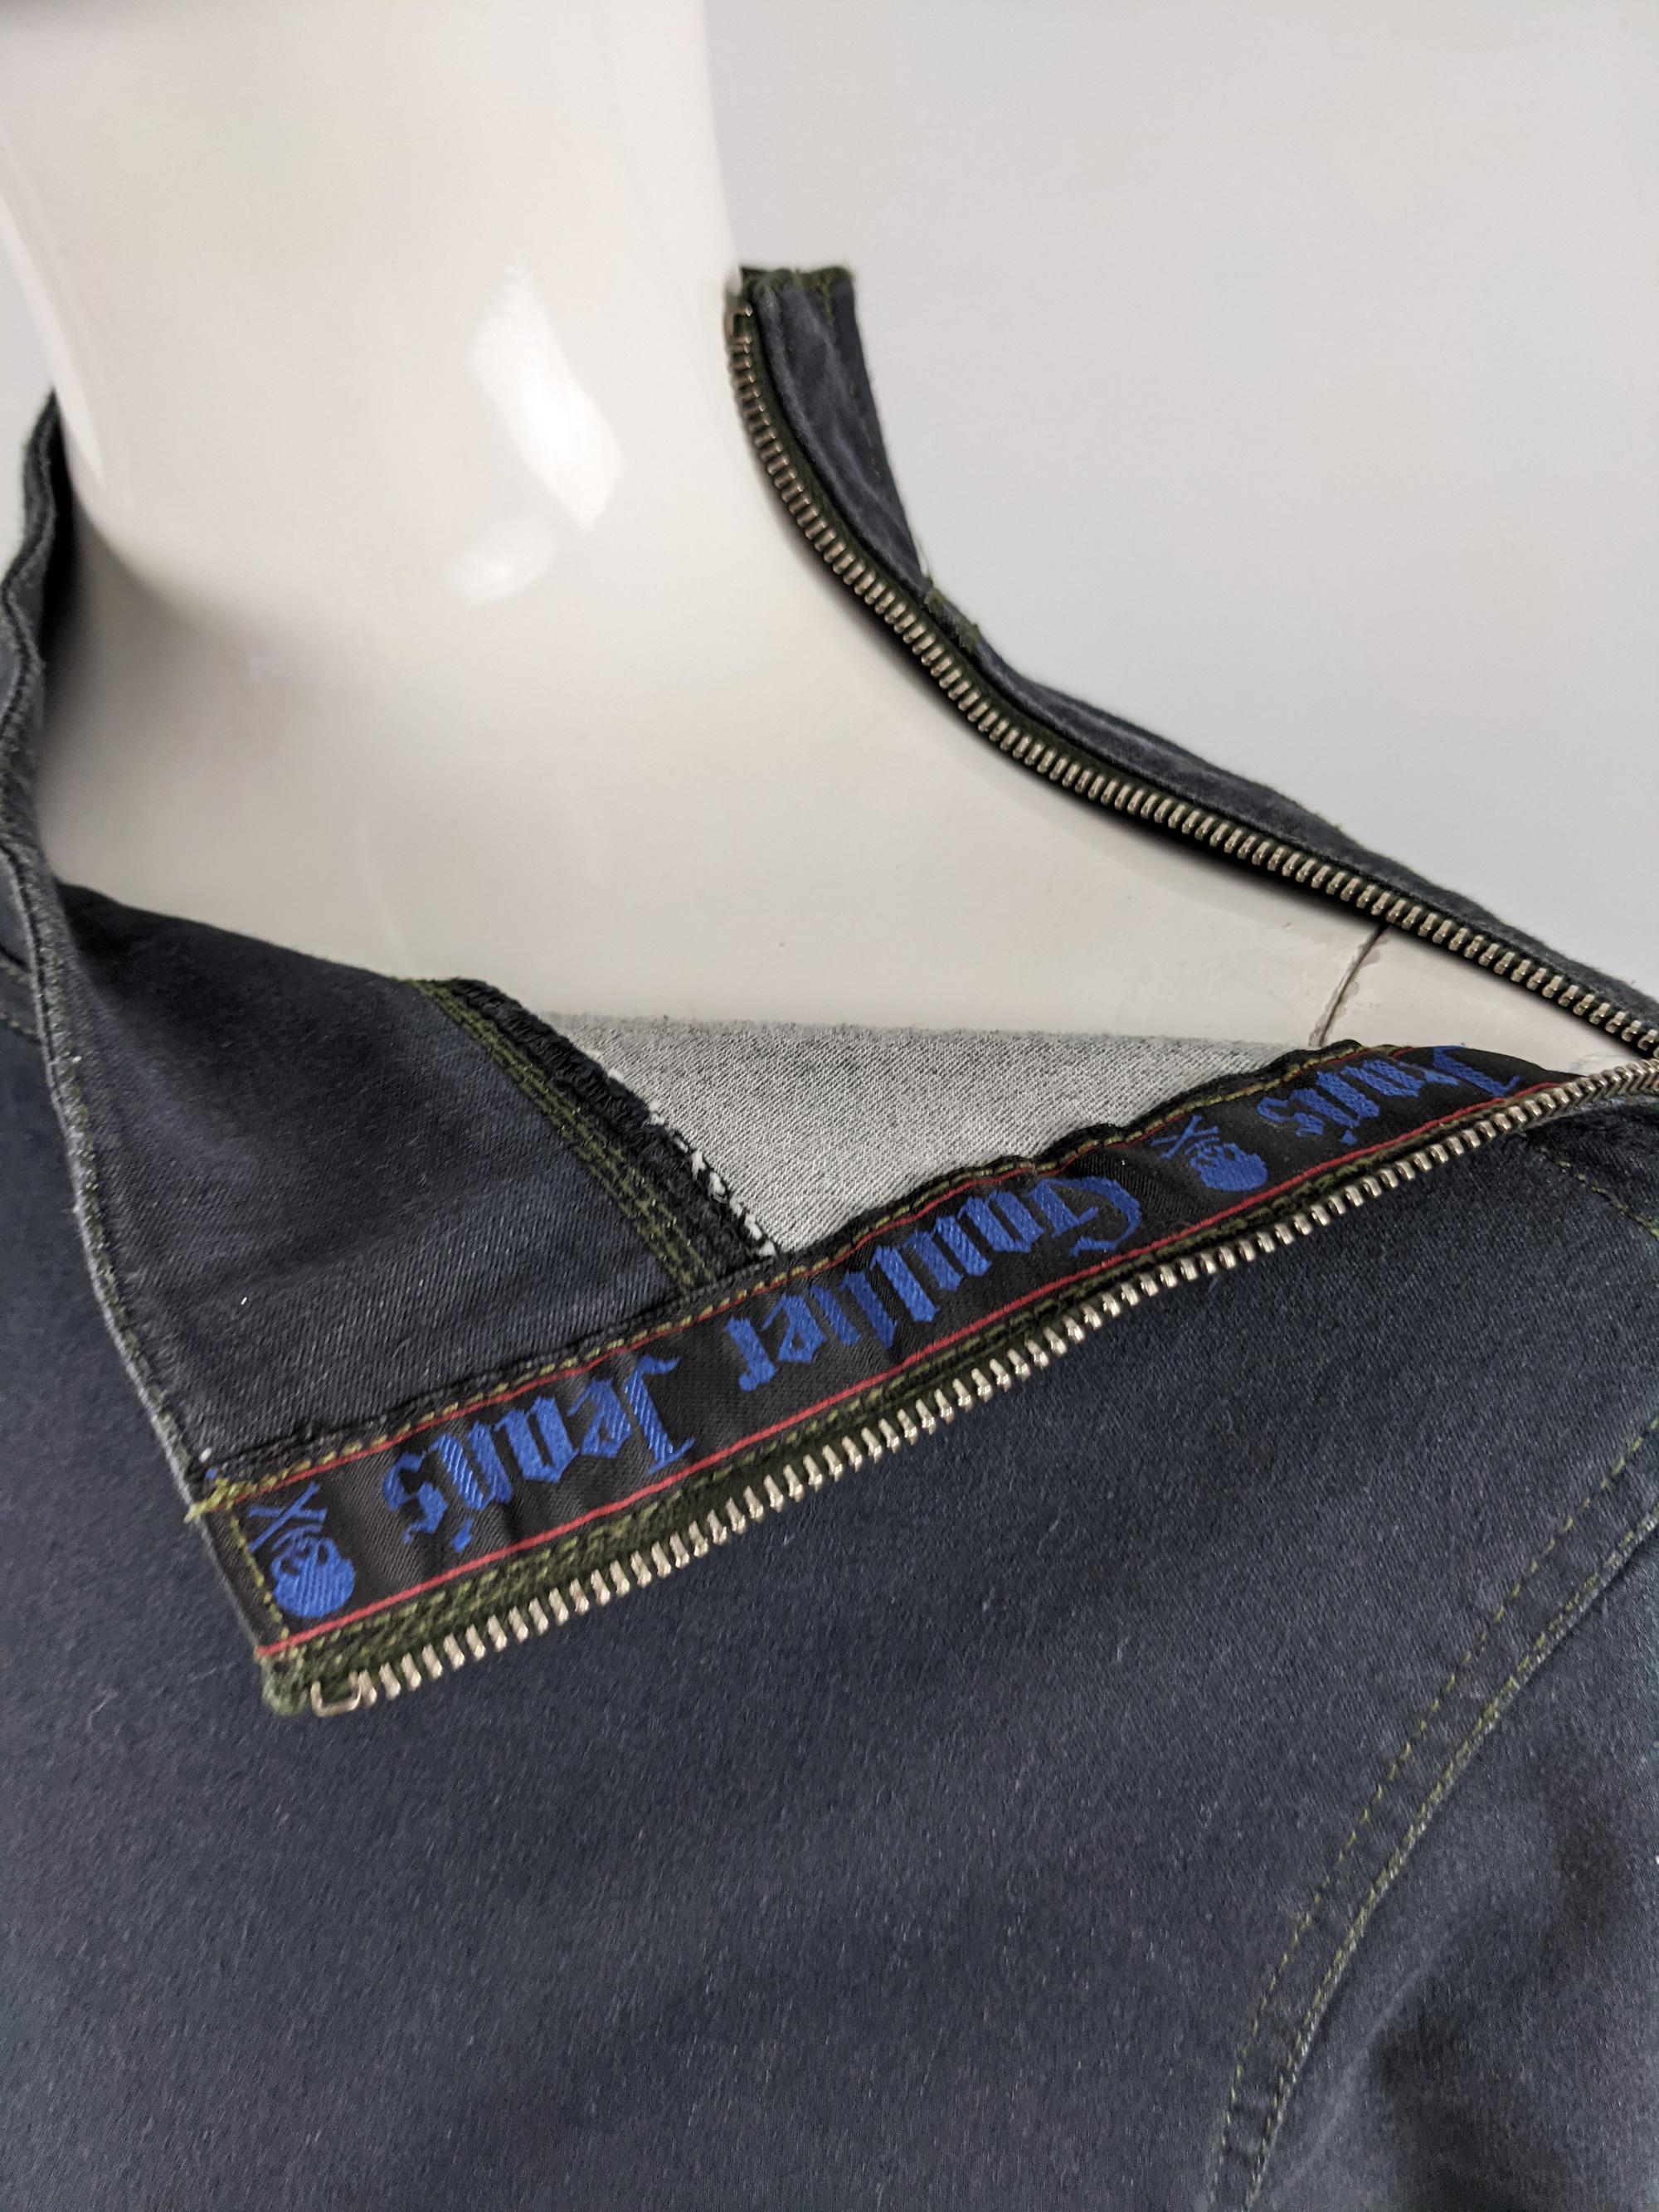 Jean Paul Gaultier Jeans Vintage Mock Neck Stretch Denim Minimalist Dress, 1990s In Good Condition For Sale In Doncaster, South Yorkshire